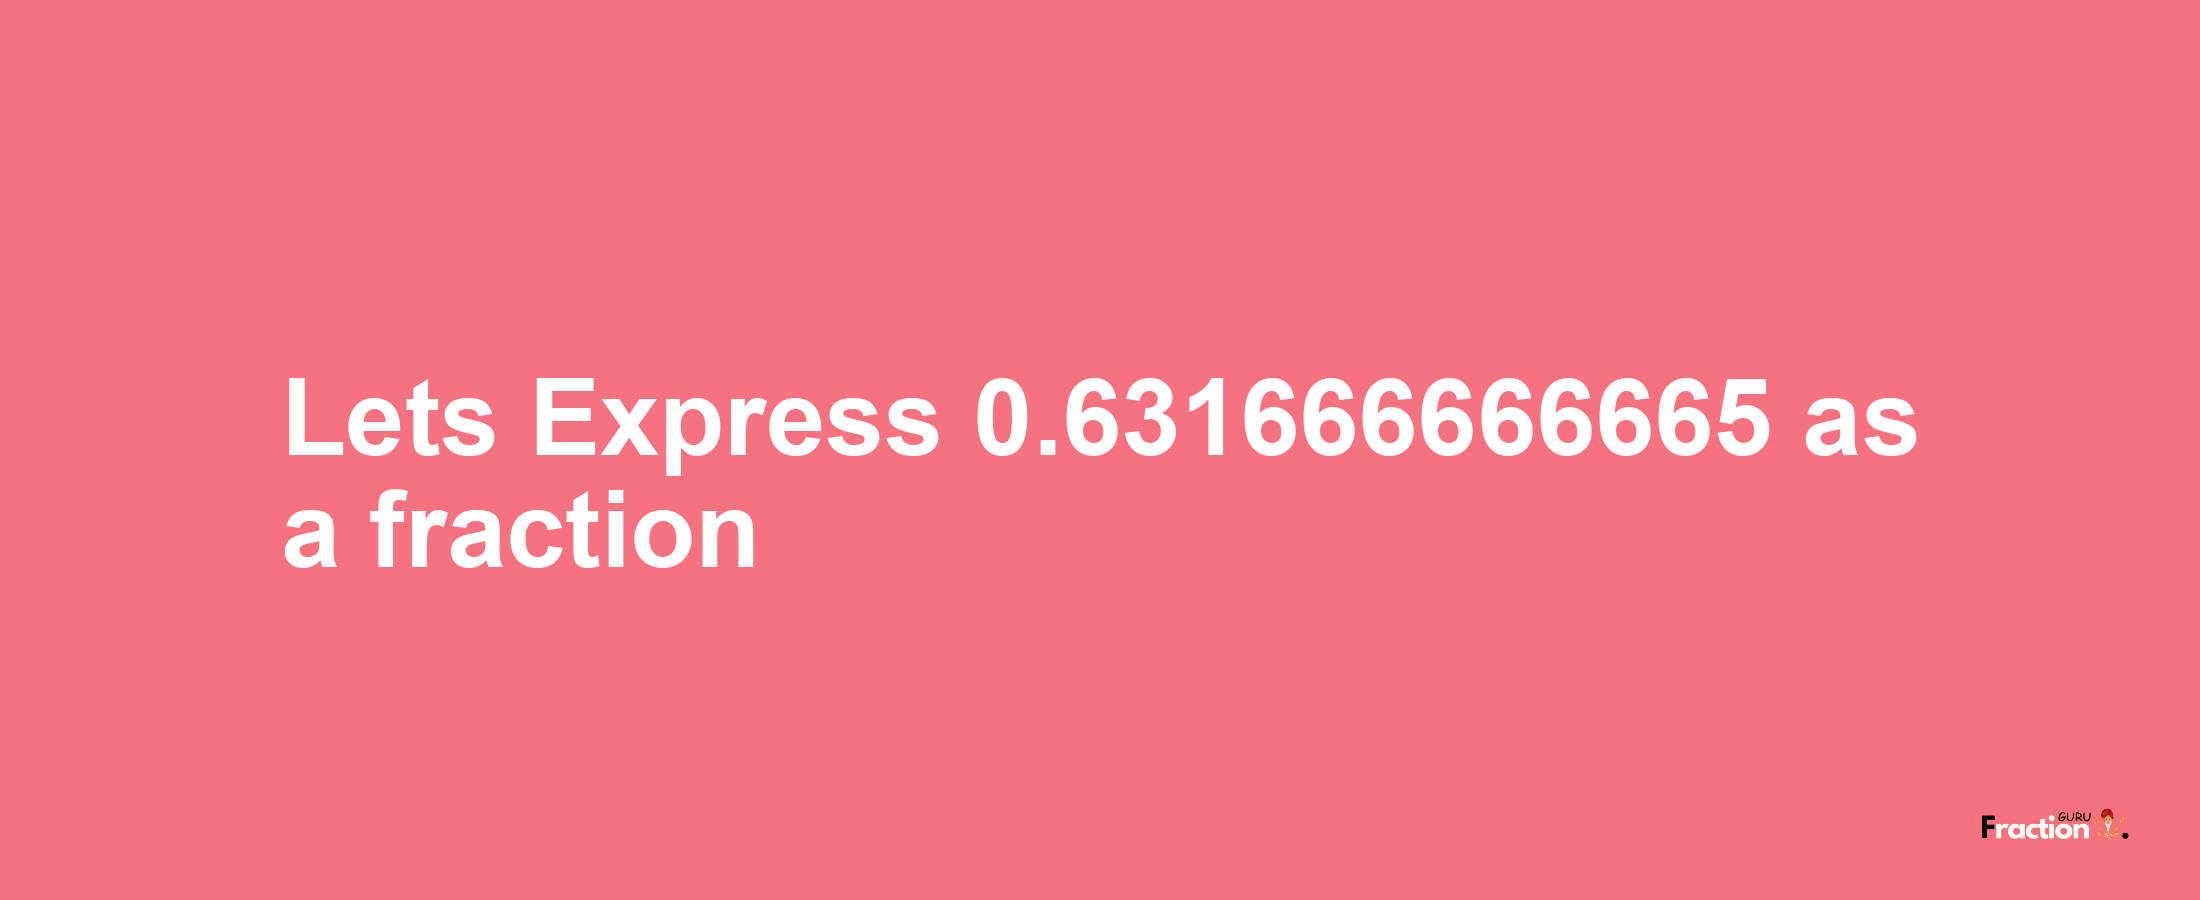 Lets Express 0.631666666665 as afraction